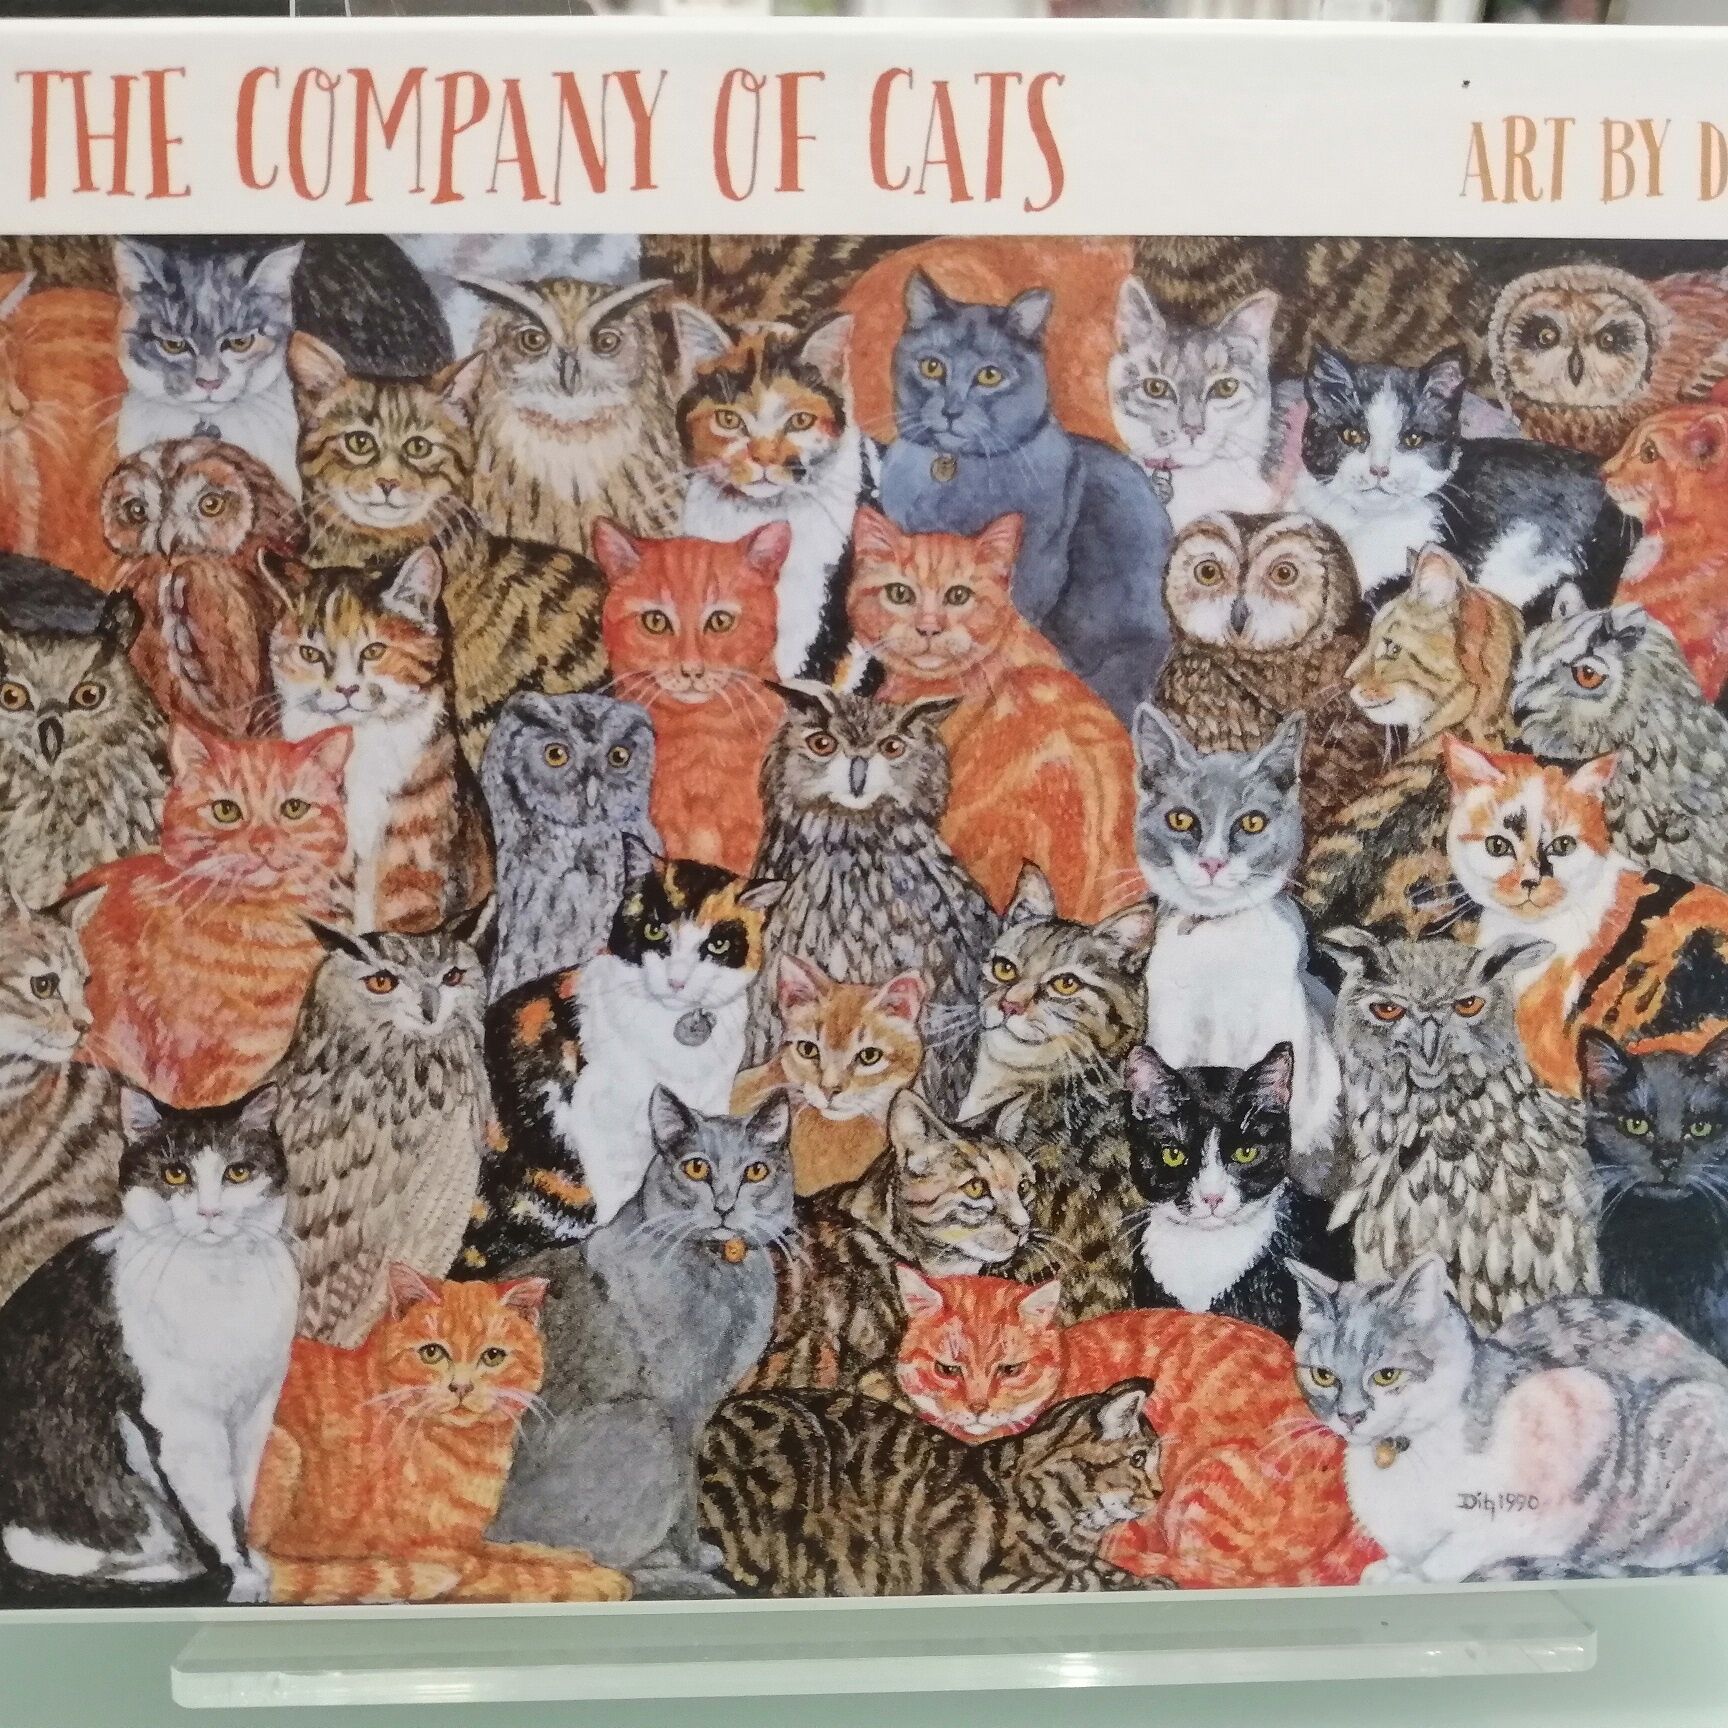 Card Set (Boxed): In the Company of Cats